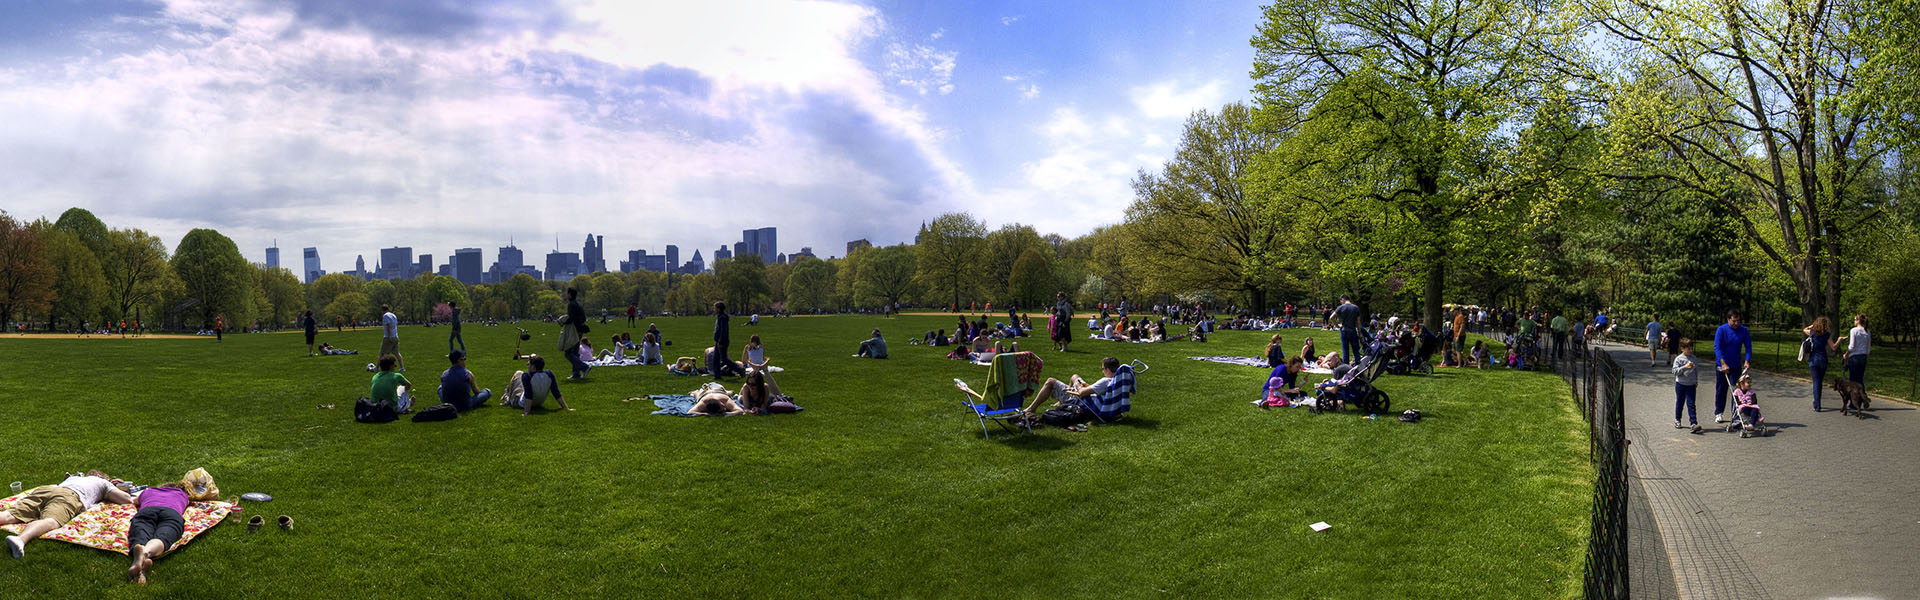 Central Park panorama